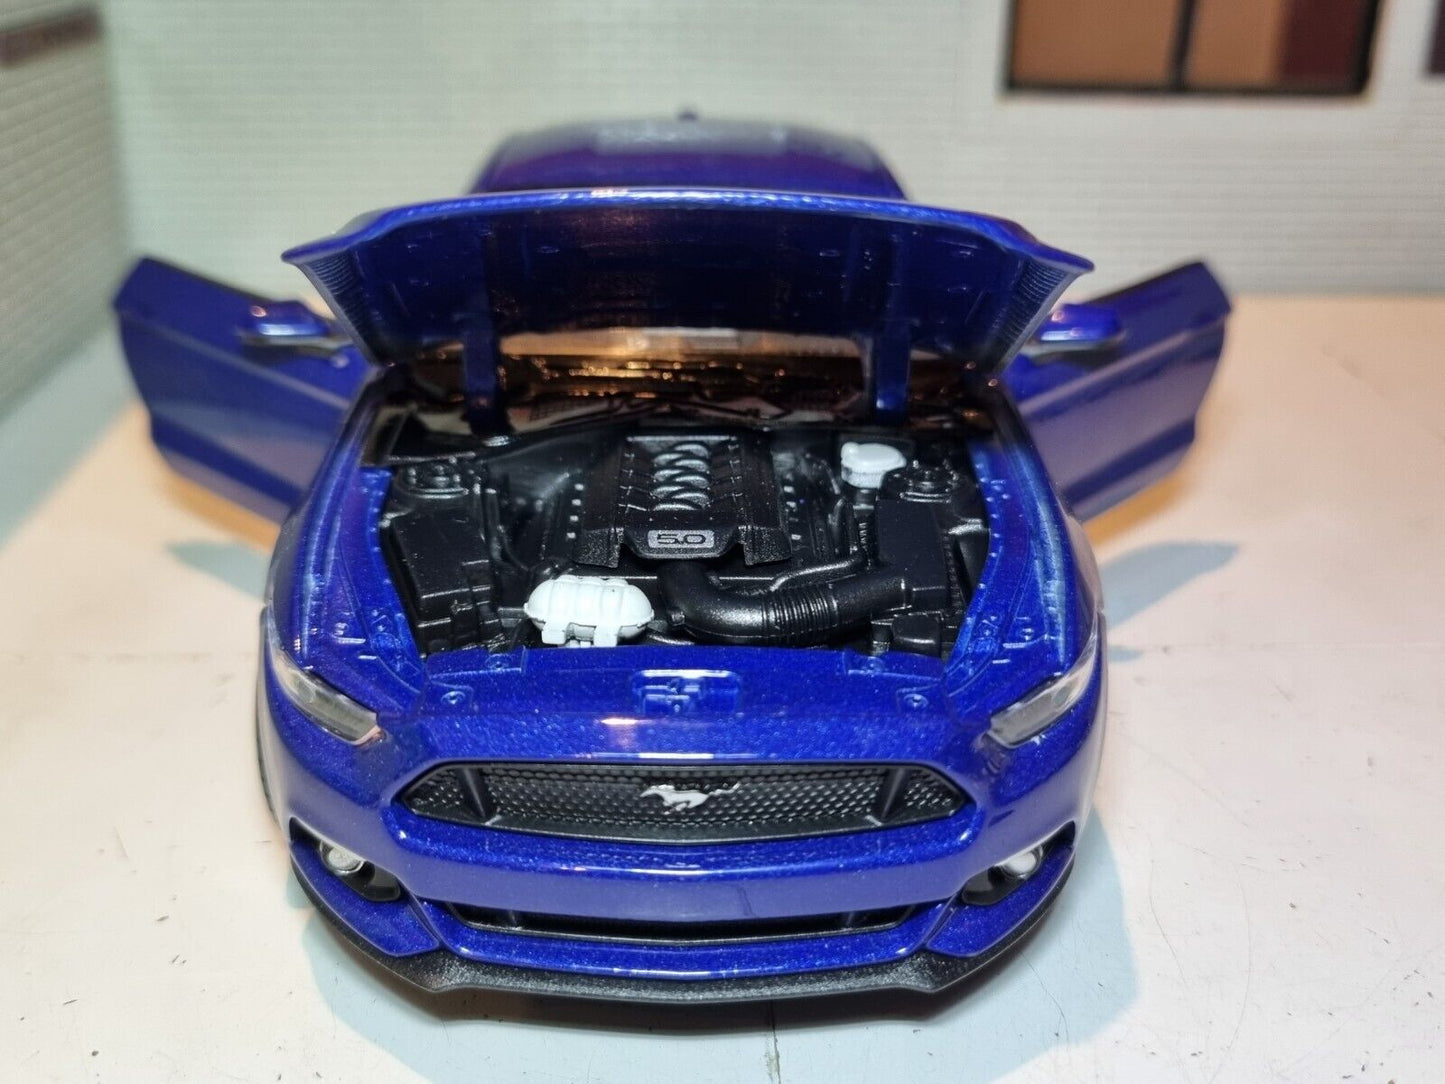 Ford Mustang 2015 24062 1:24